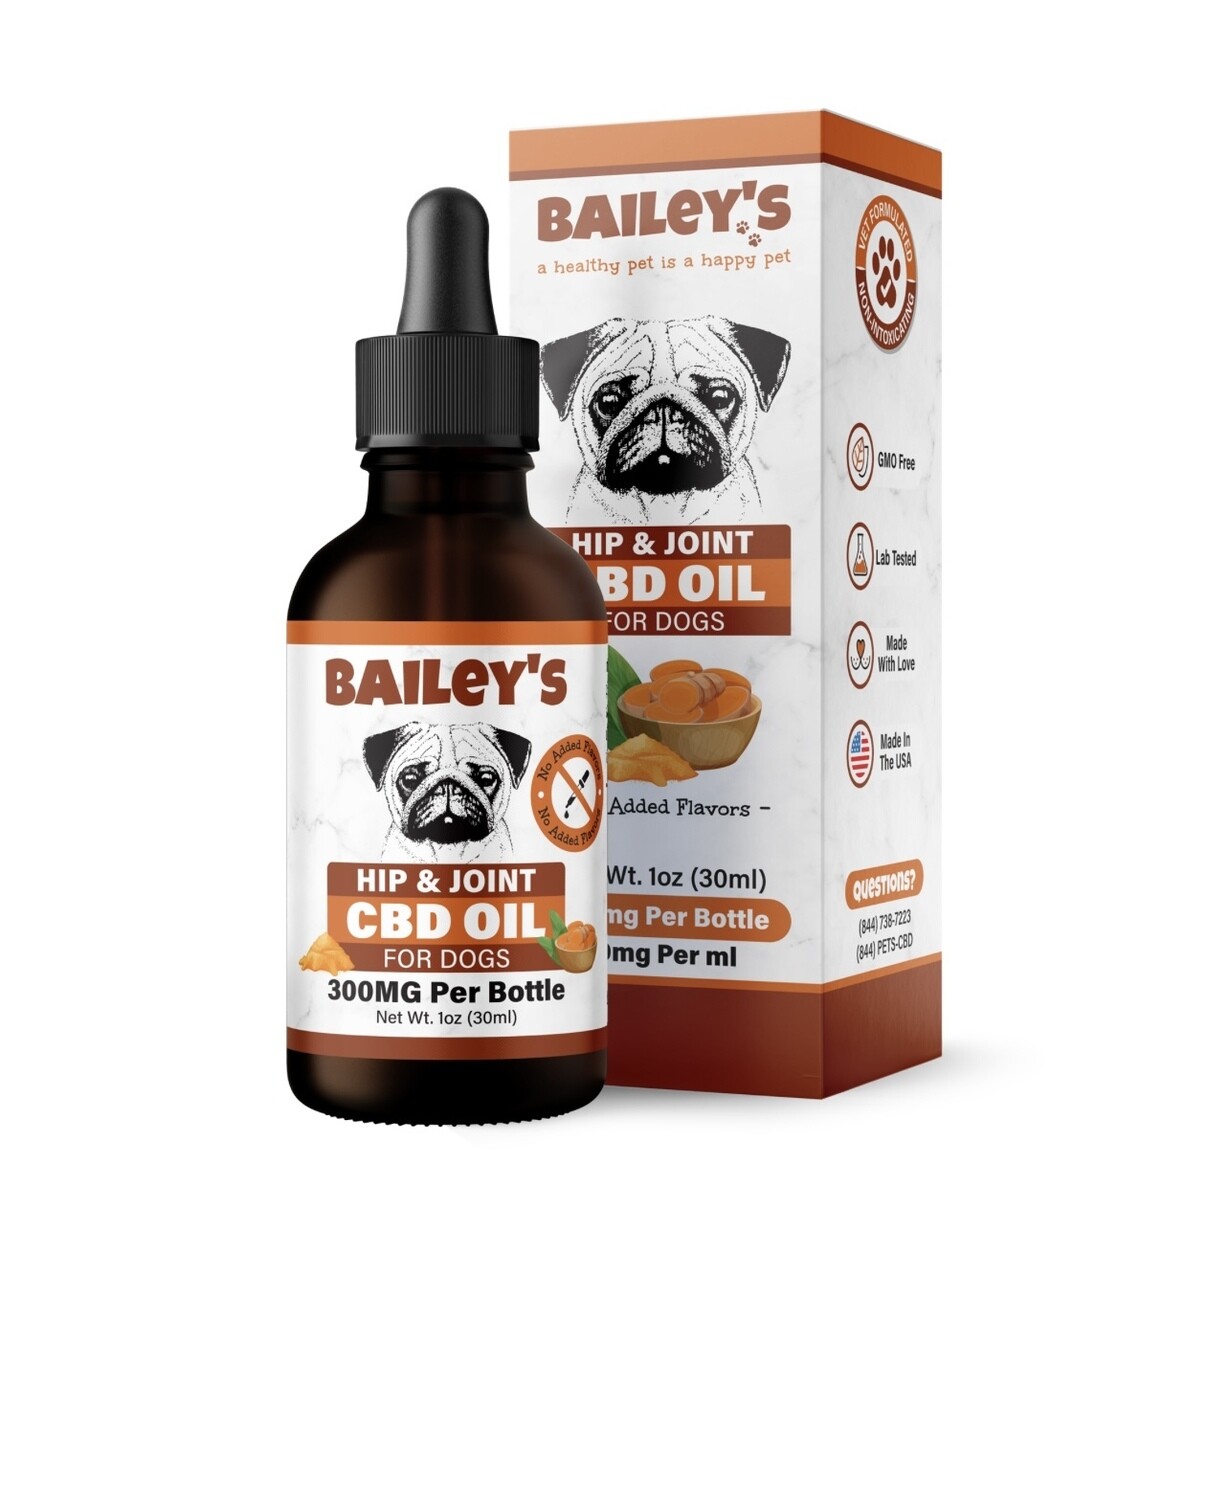 Bailey's Full Spectrum Hip & Joint Hemp Oil For Dogs w/ 300MG Naturally Occurring CBD